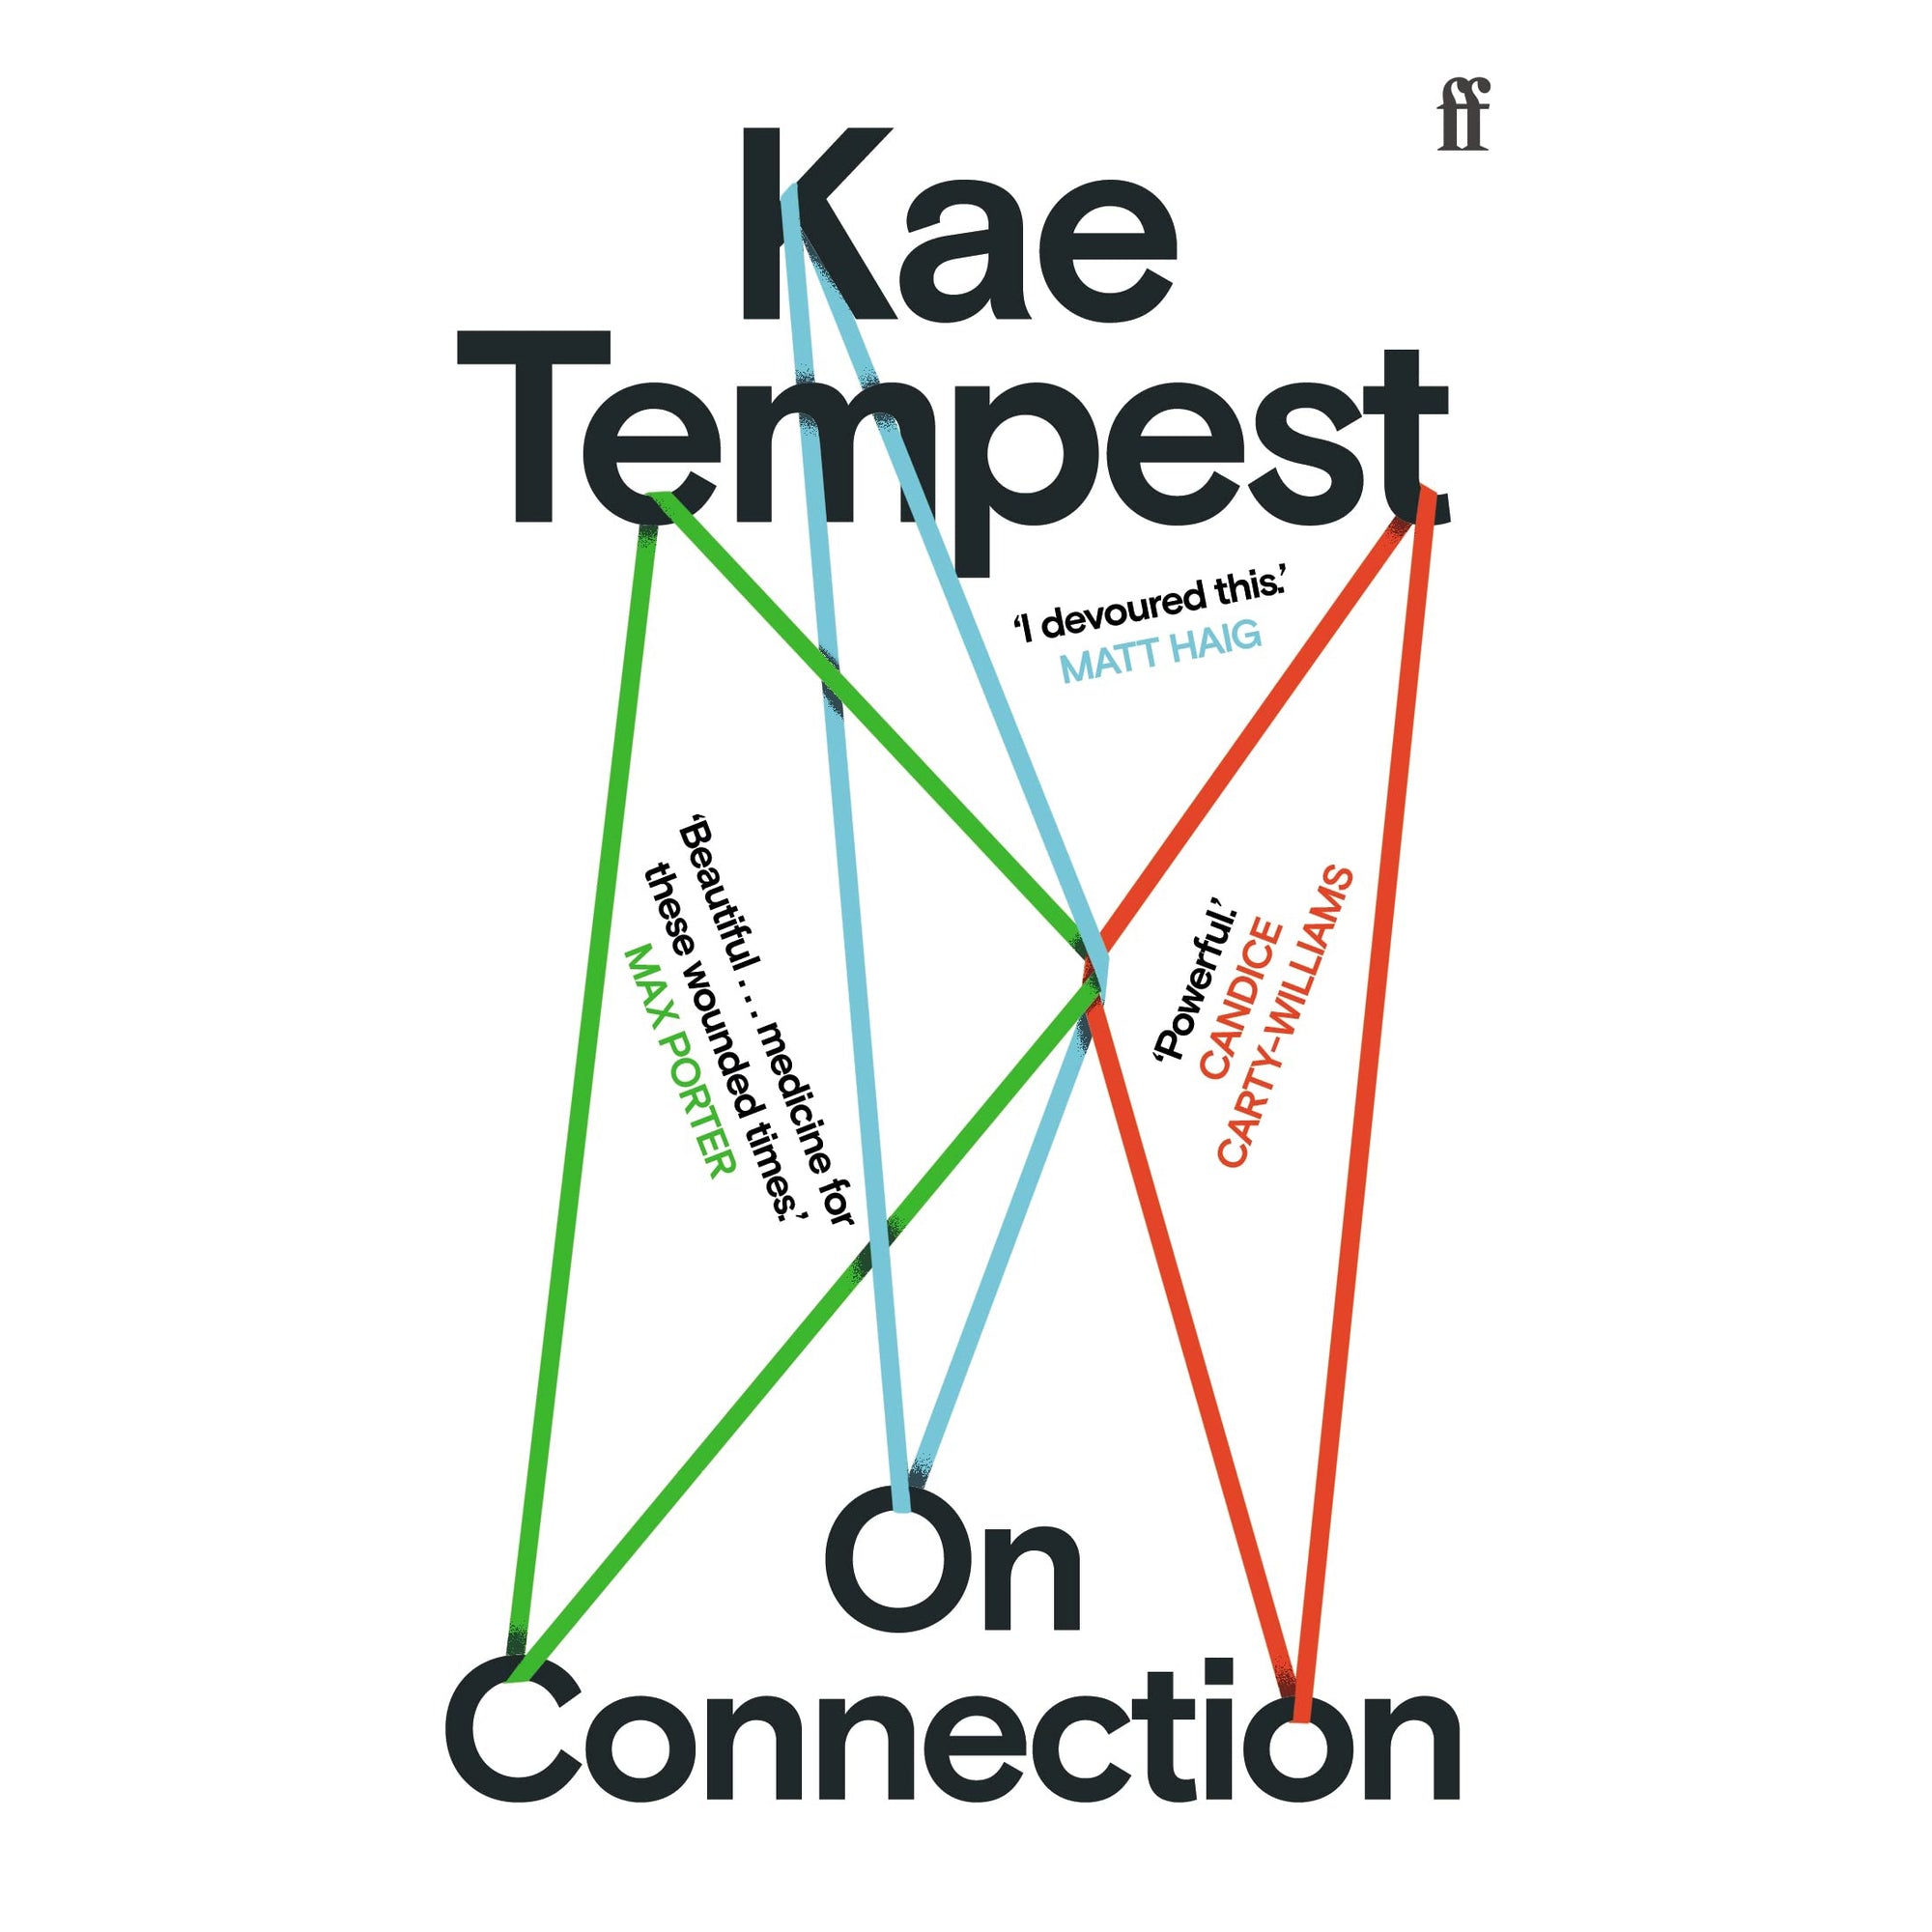 Kae Tempest On Connection